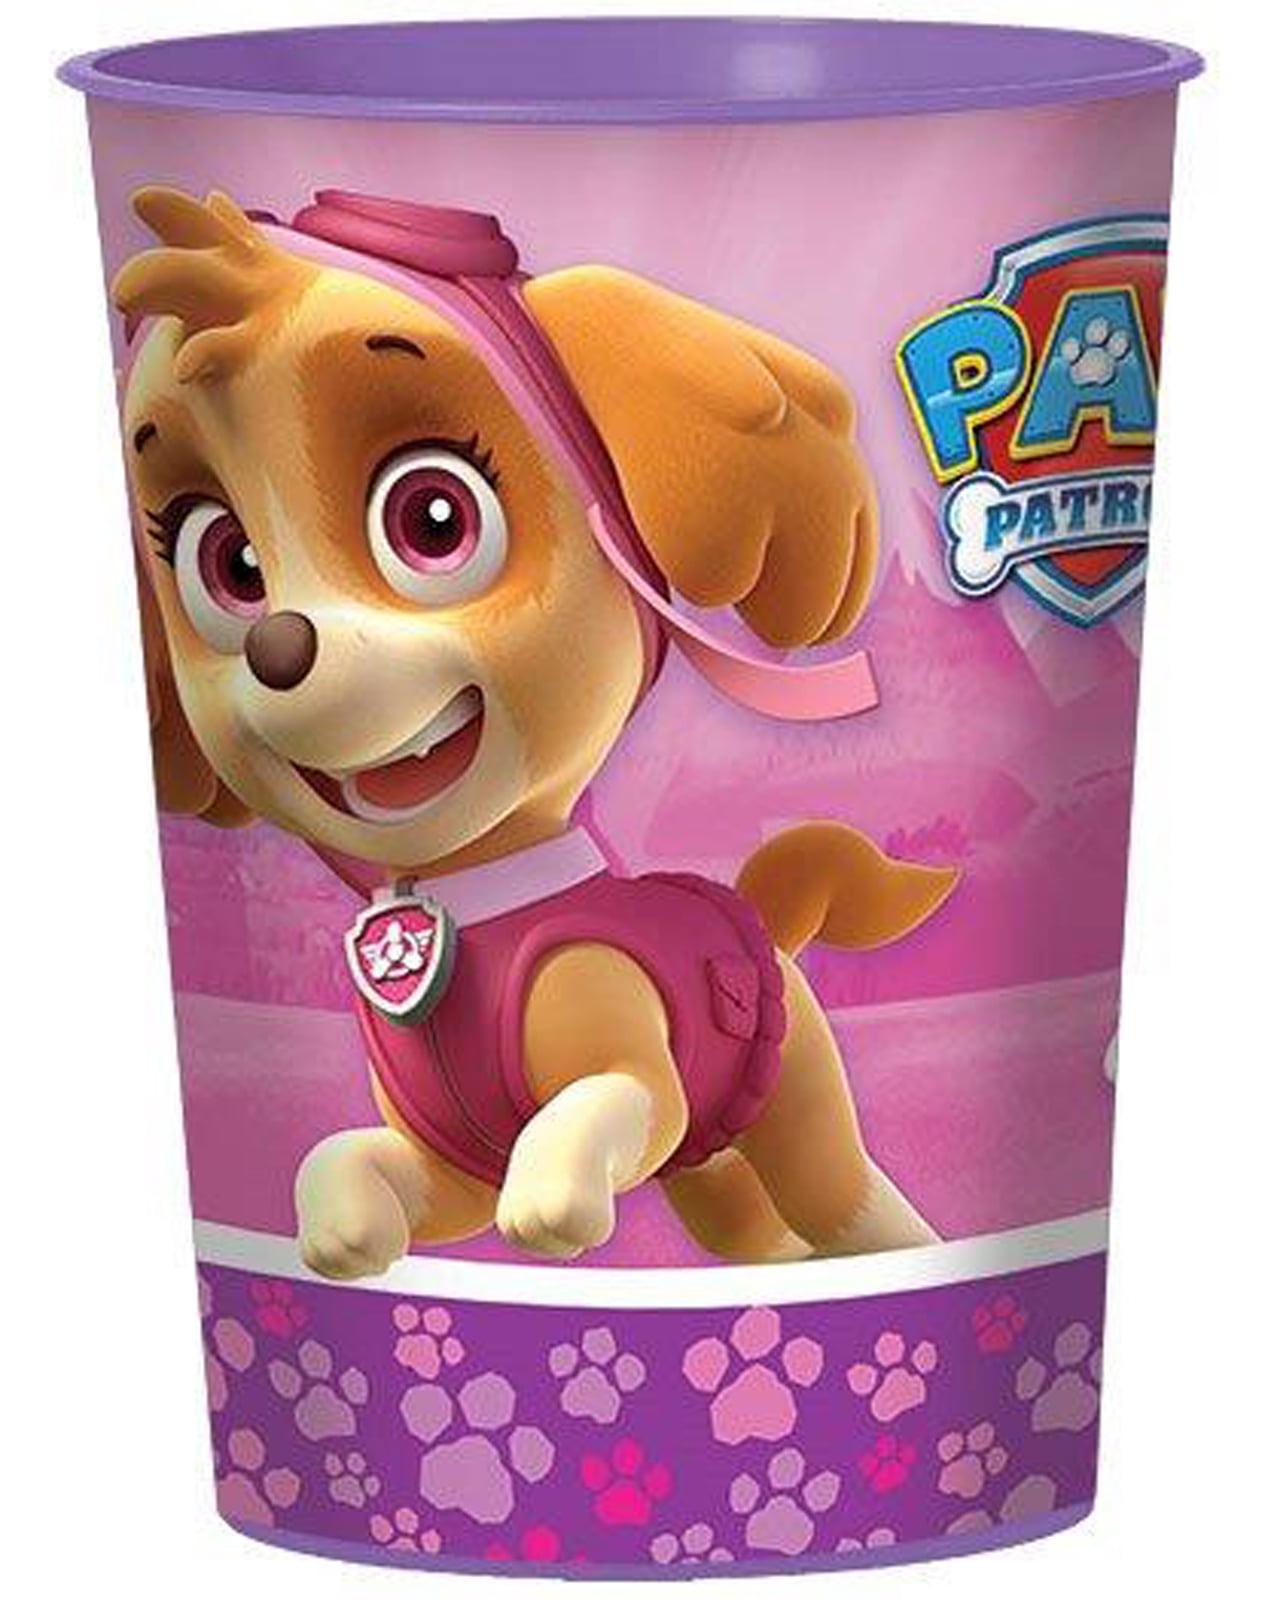 Paw Patrol Plastic Party Cups Set of 4 